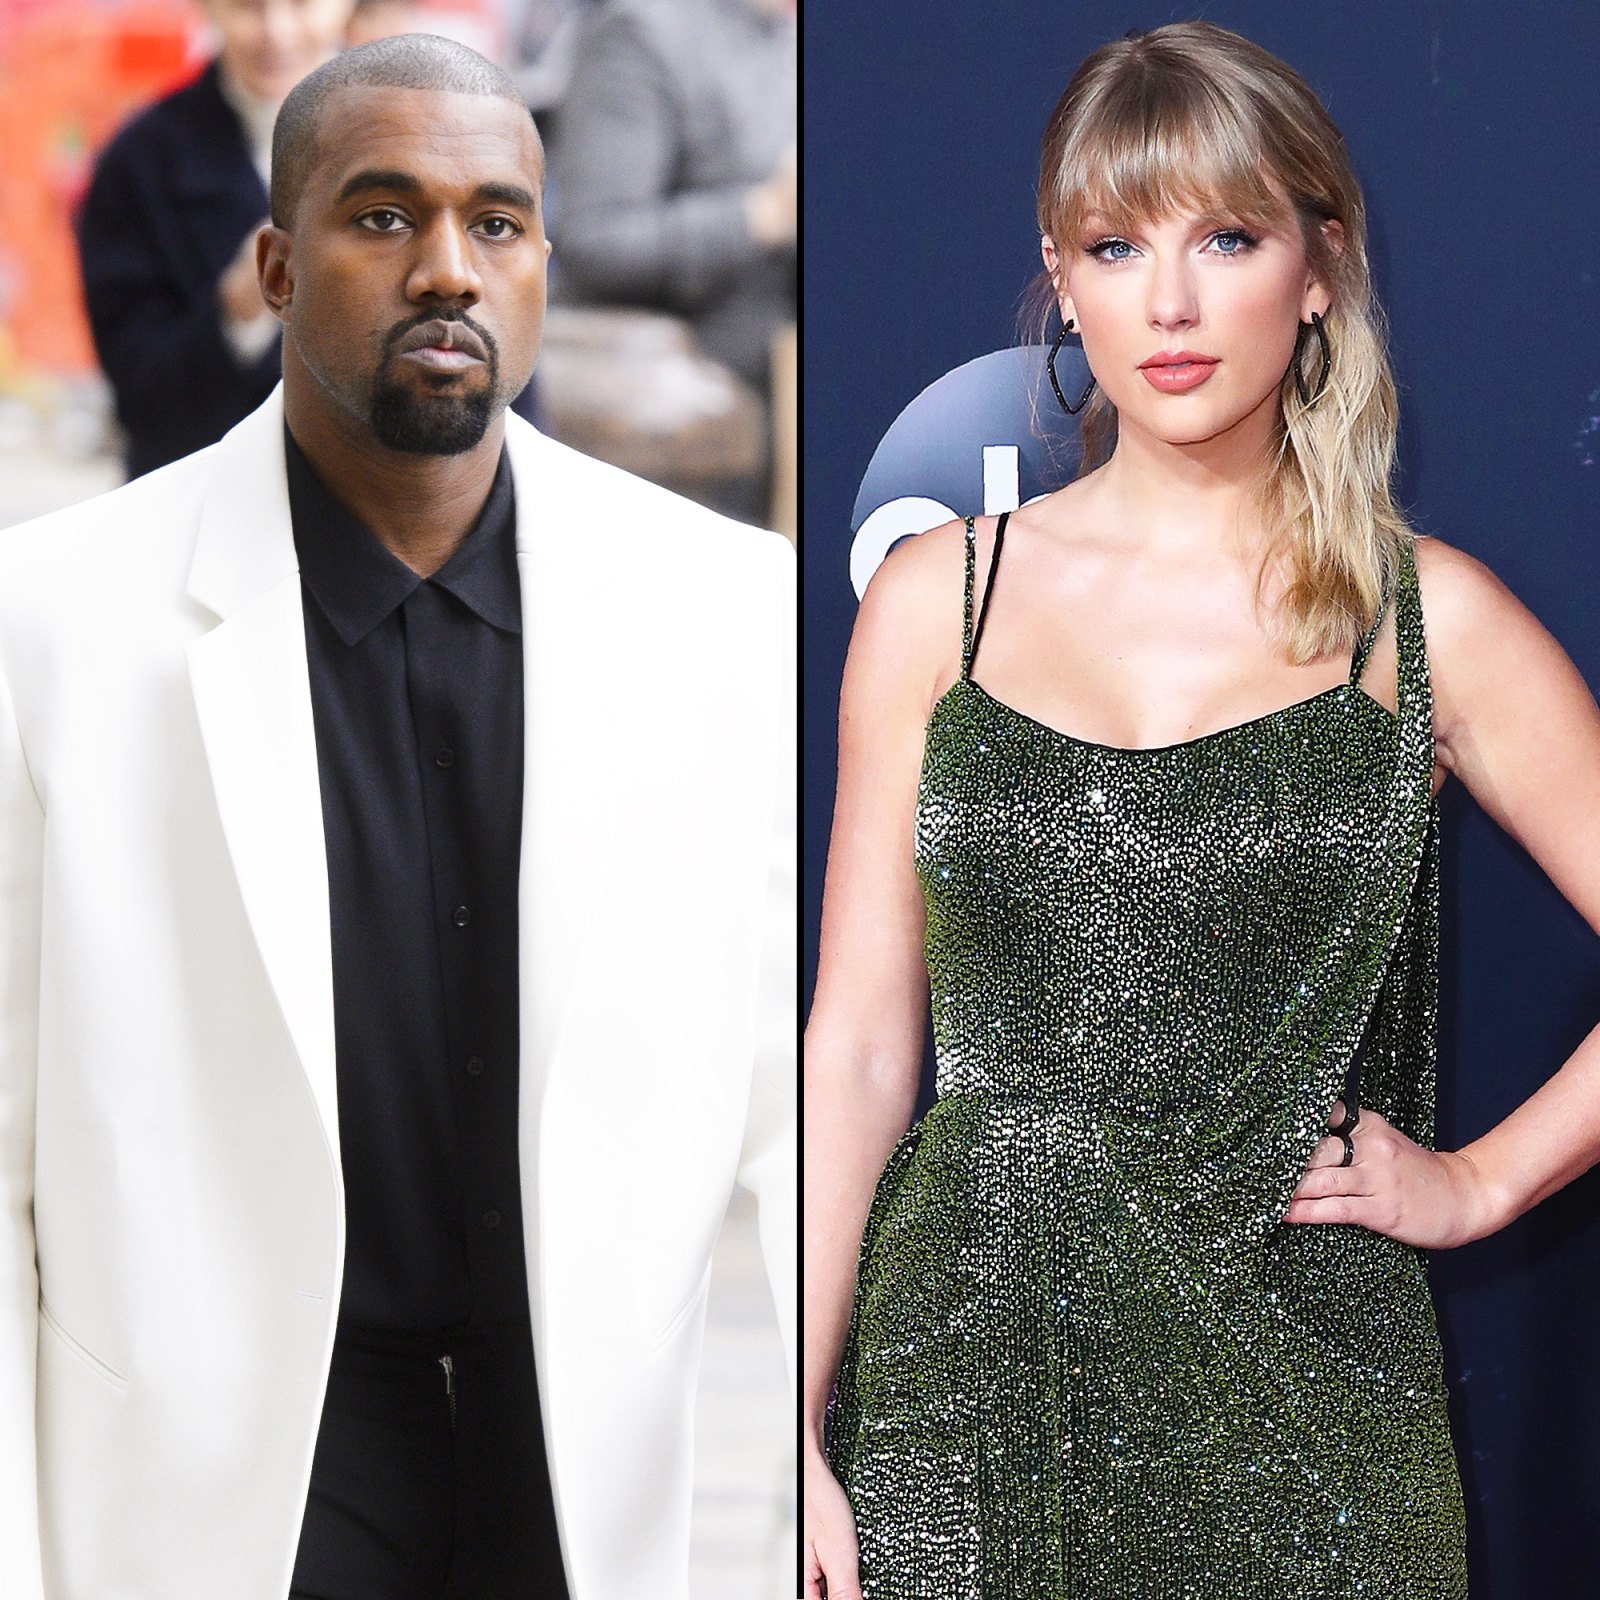 Kanye West Appears To Shade Taylor Swift With Snake Emoji Reference